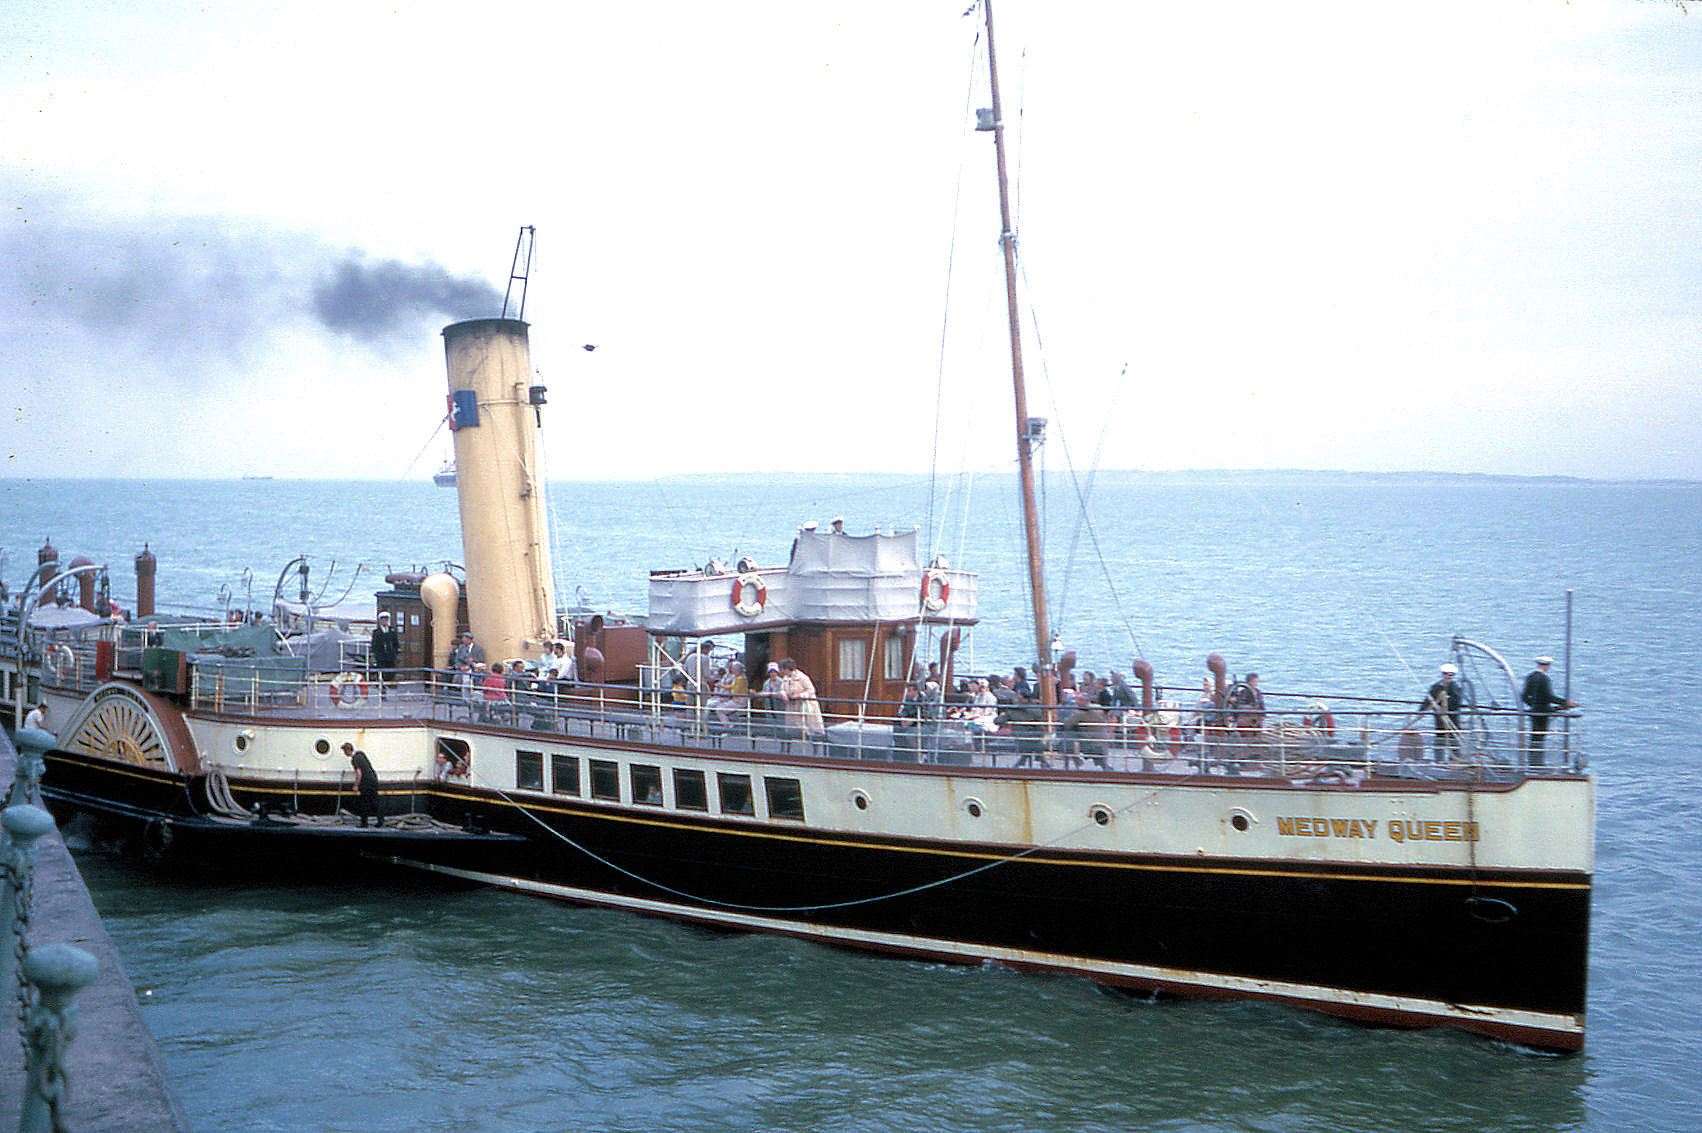 The paddle steamer will undergo a restoration in Ramsgate